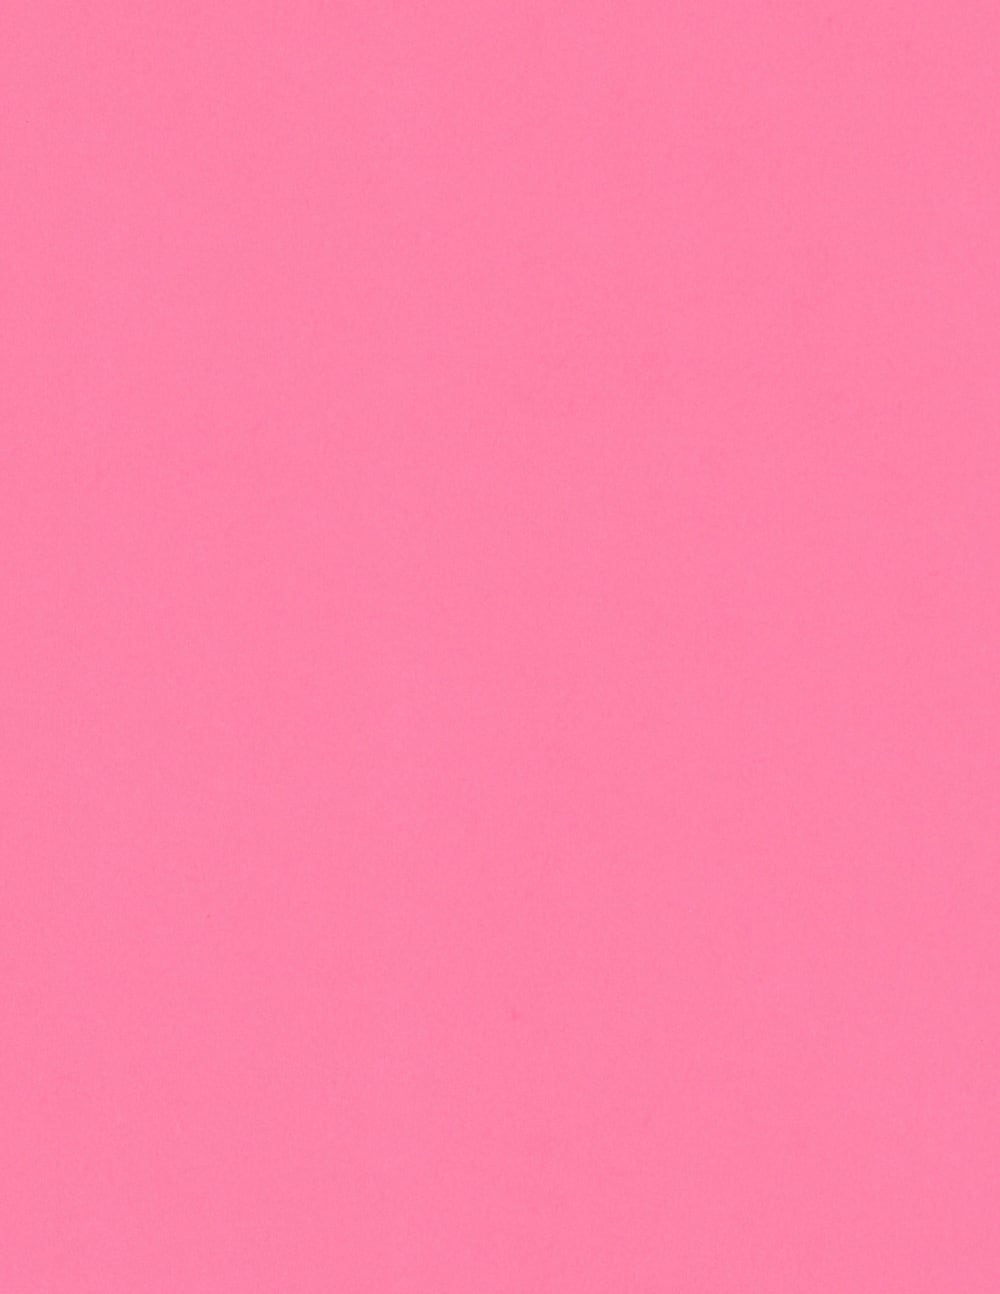 Basic PINK Card Stock Paper - 8.5 x 11 - 100lb Cover (270gsm) - 100 PK